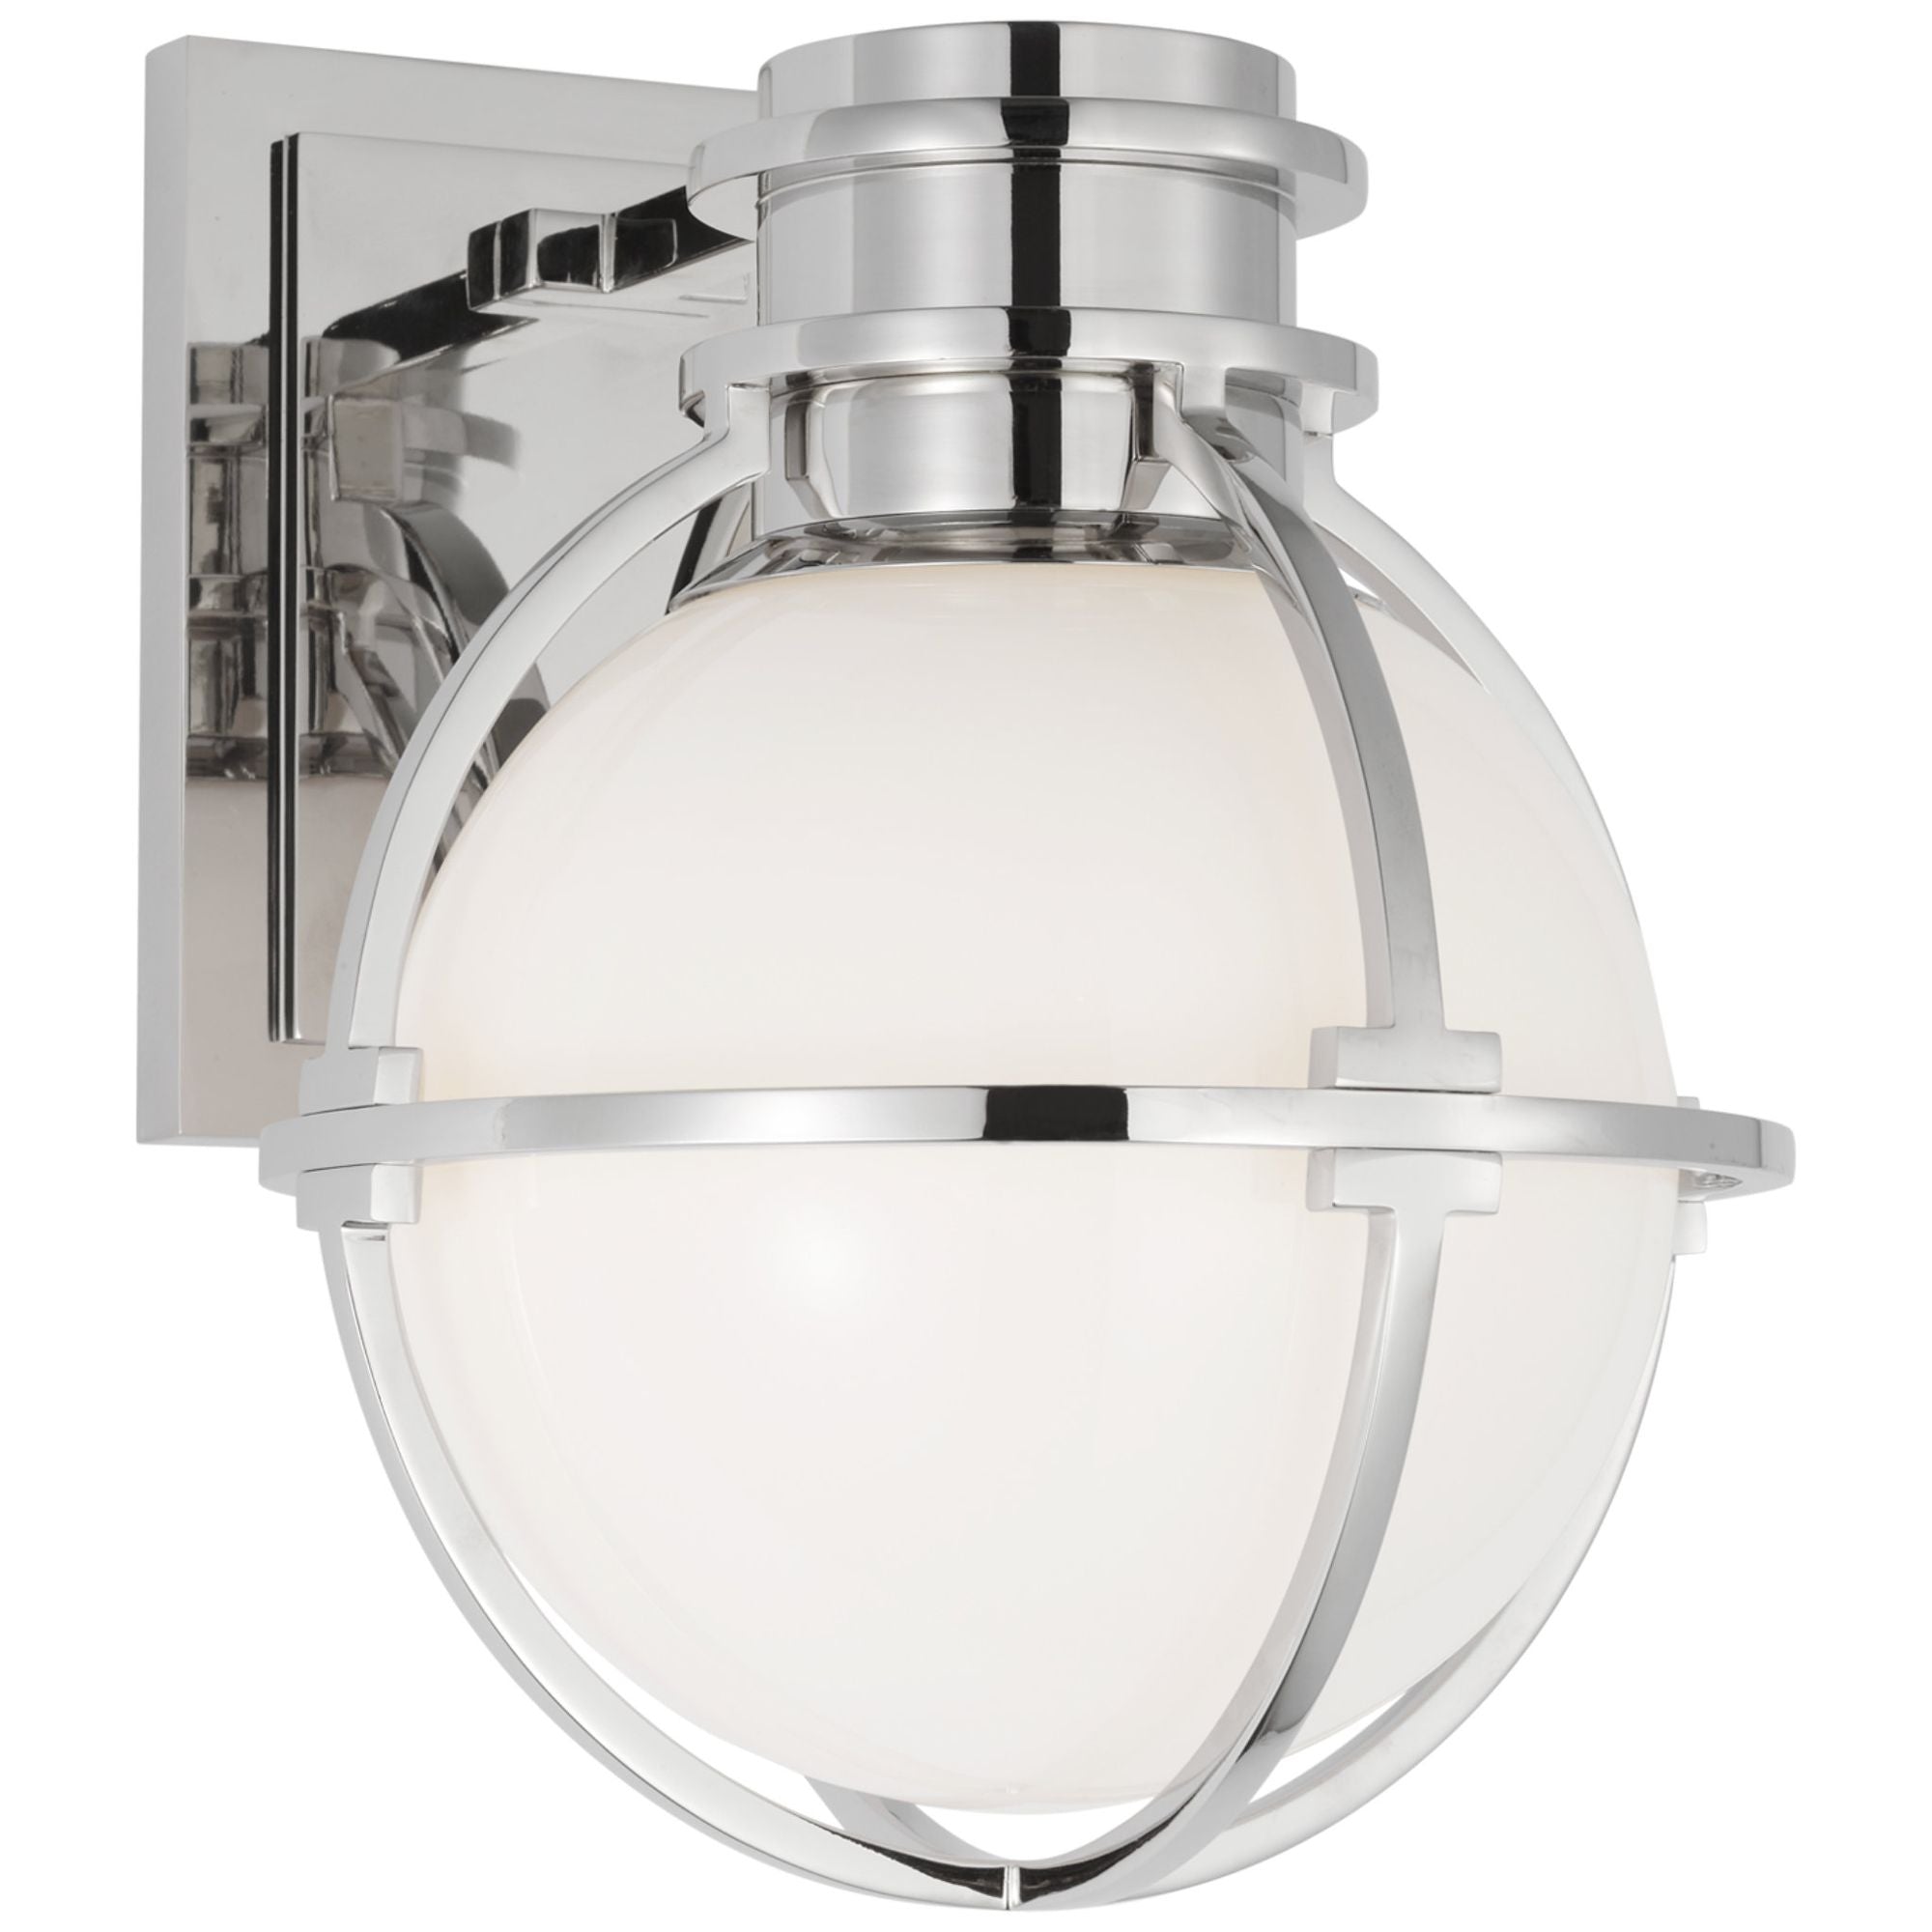 Chapman & Myers Gracie Single Sconce in Polished Nickel with White Glass